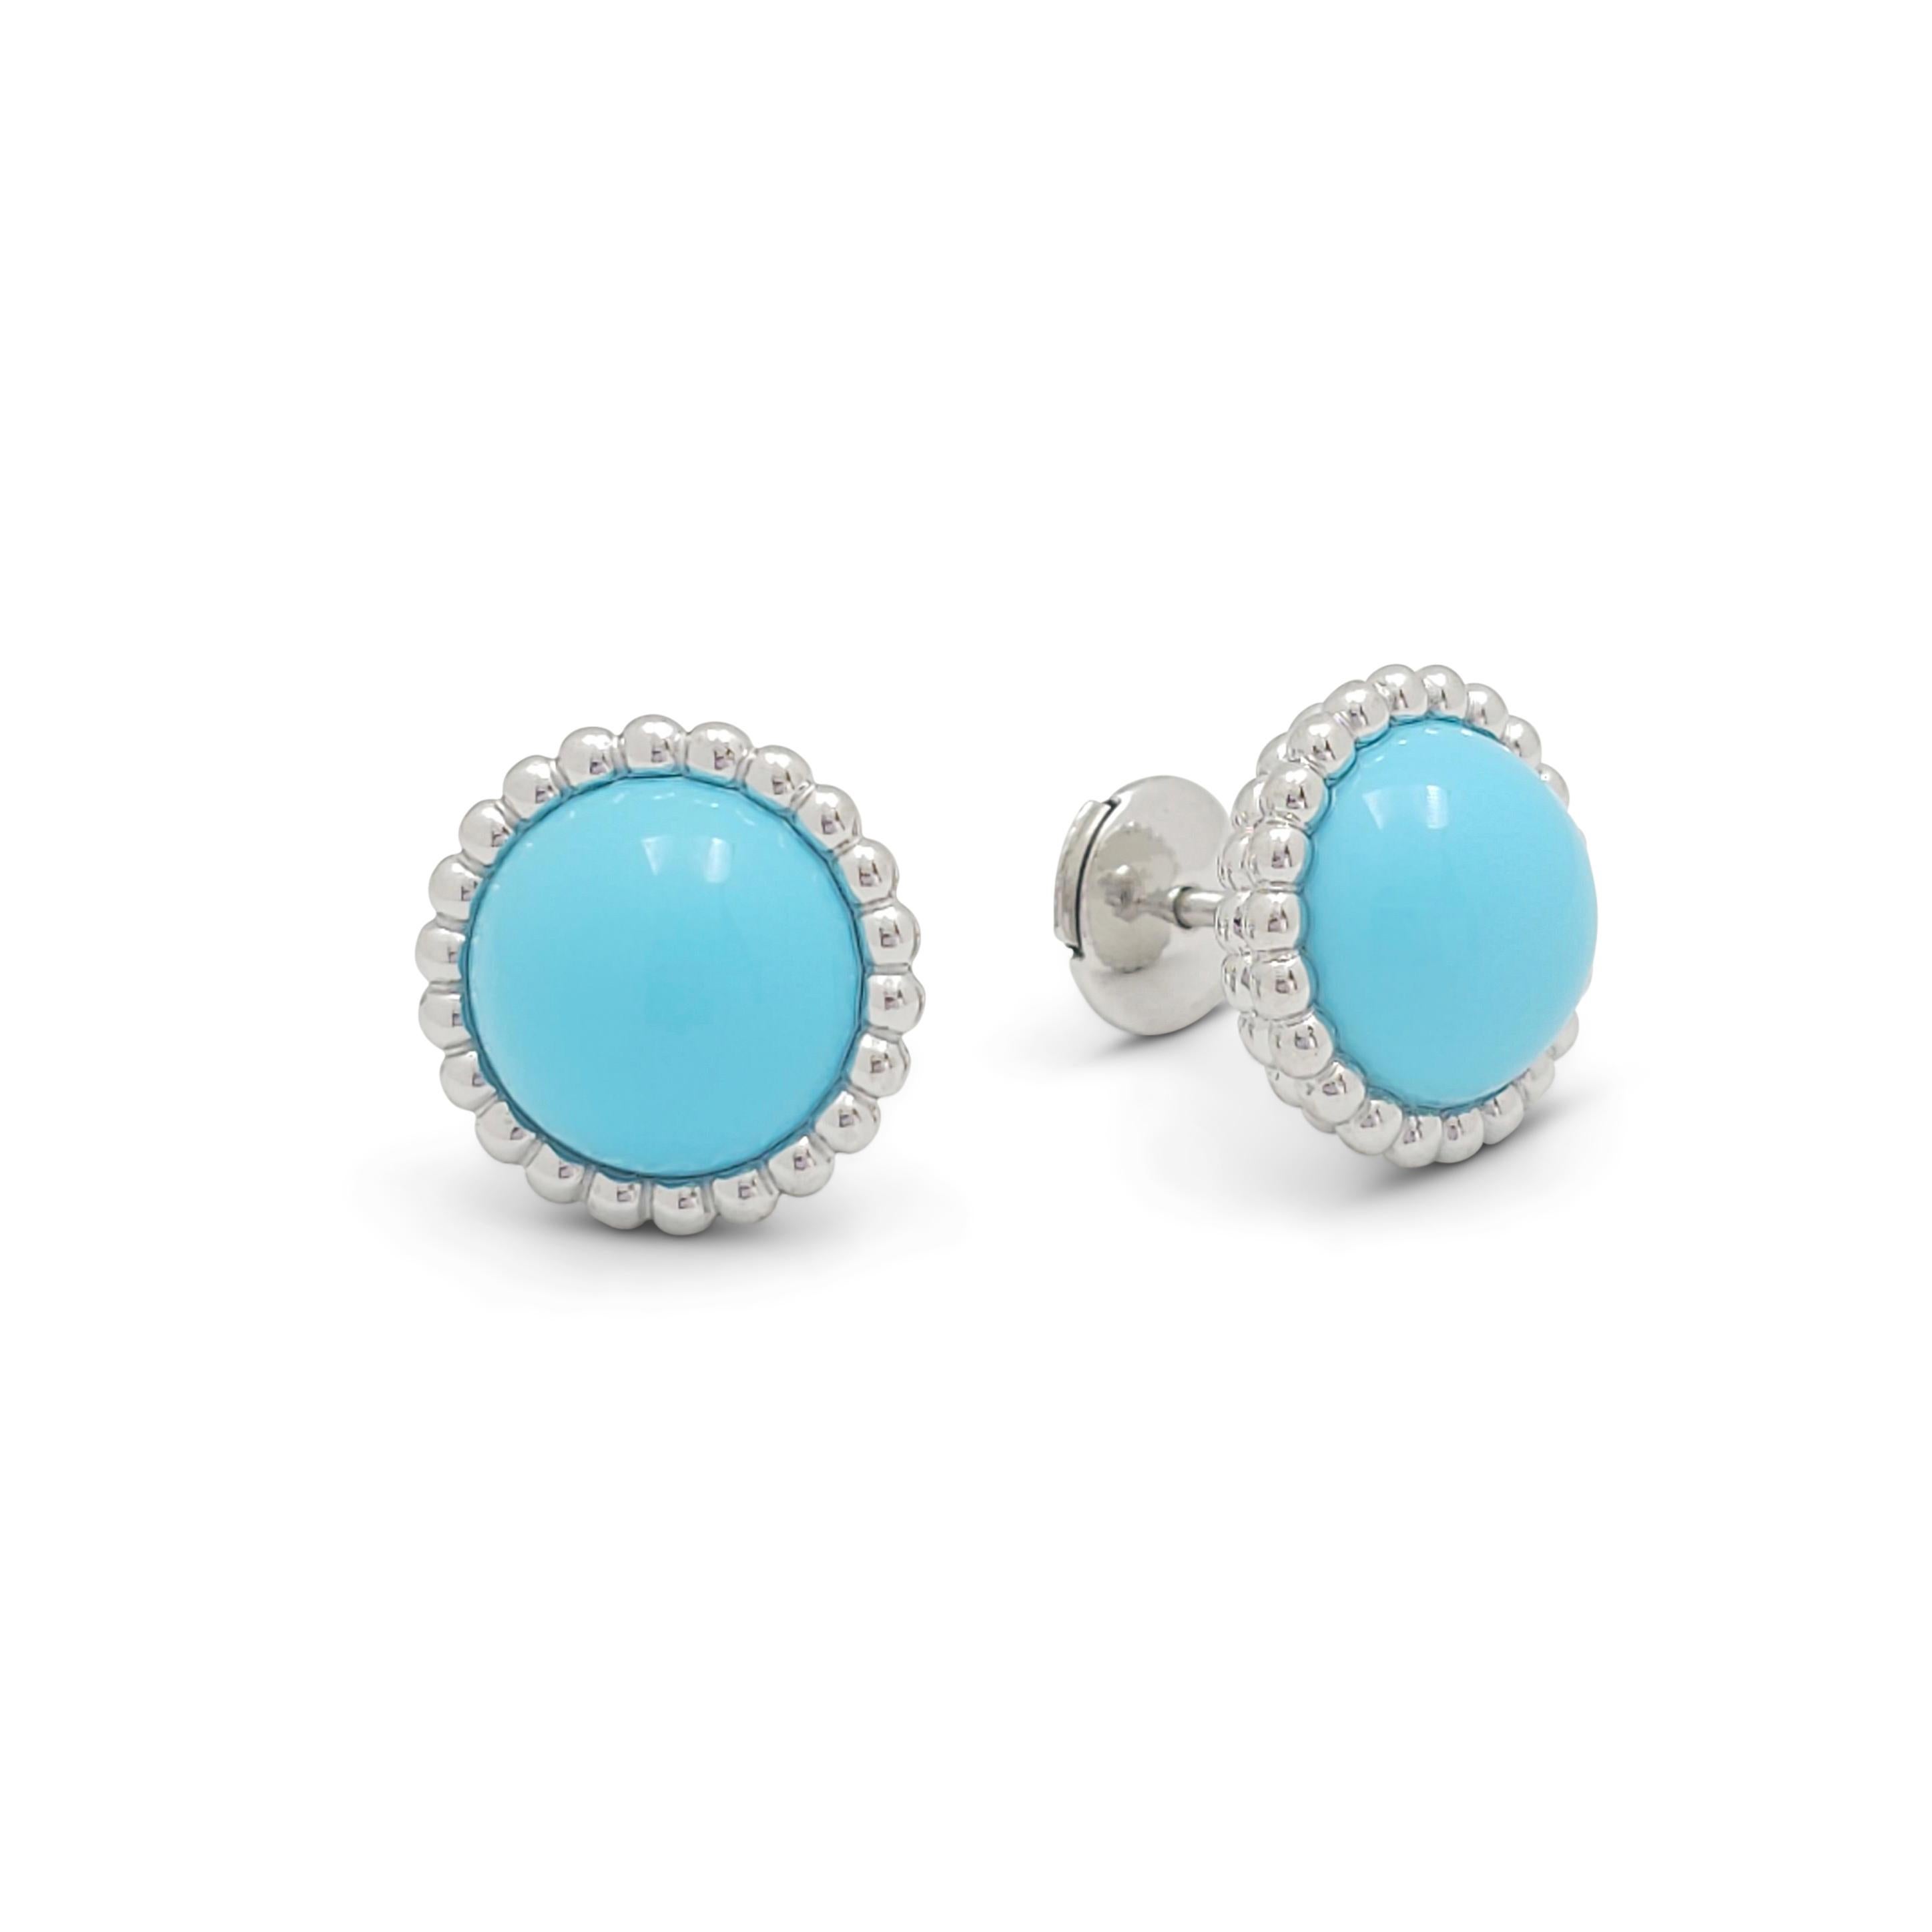 Authentic Van Cleef & Arpels Perlée Couleurs earrings crafted in 18 karat white gold.  Each earring features a cabochon turquoise stone surrounded by the brand's iconic perlée beads.  The earrings measure 1/2 inch in with.  Signed VCA, Au 750 with